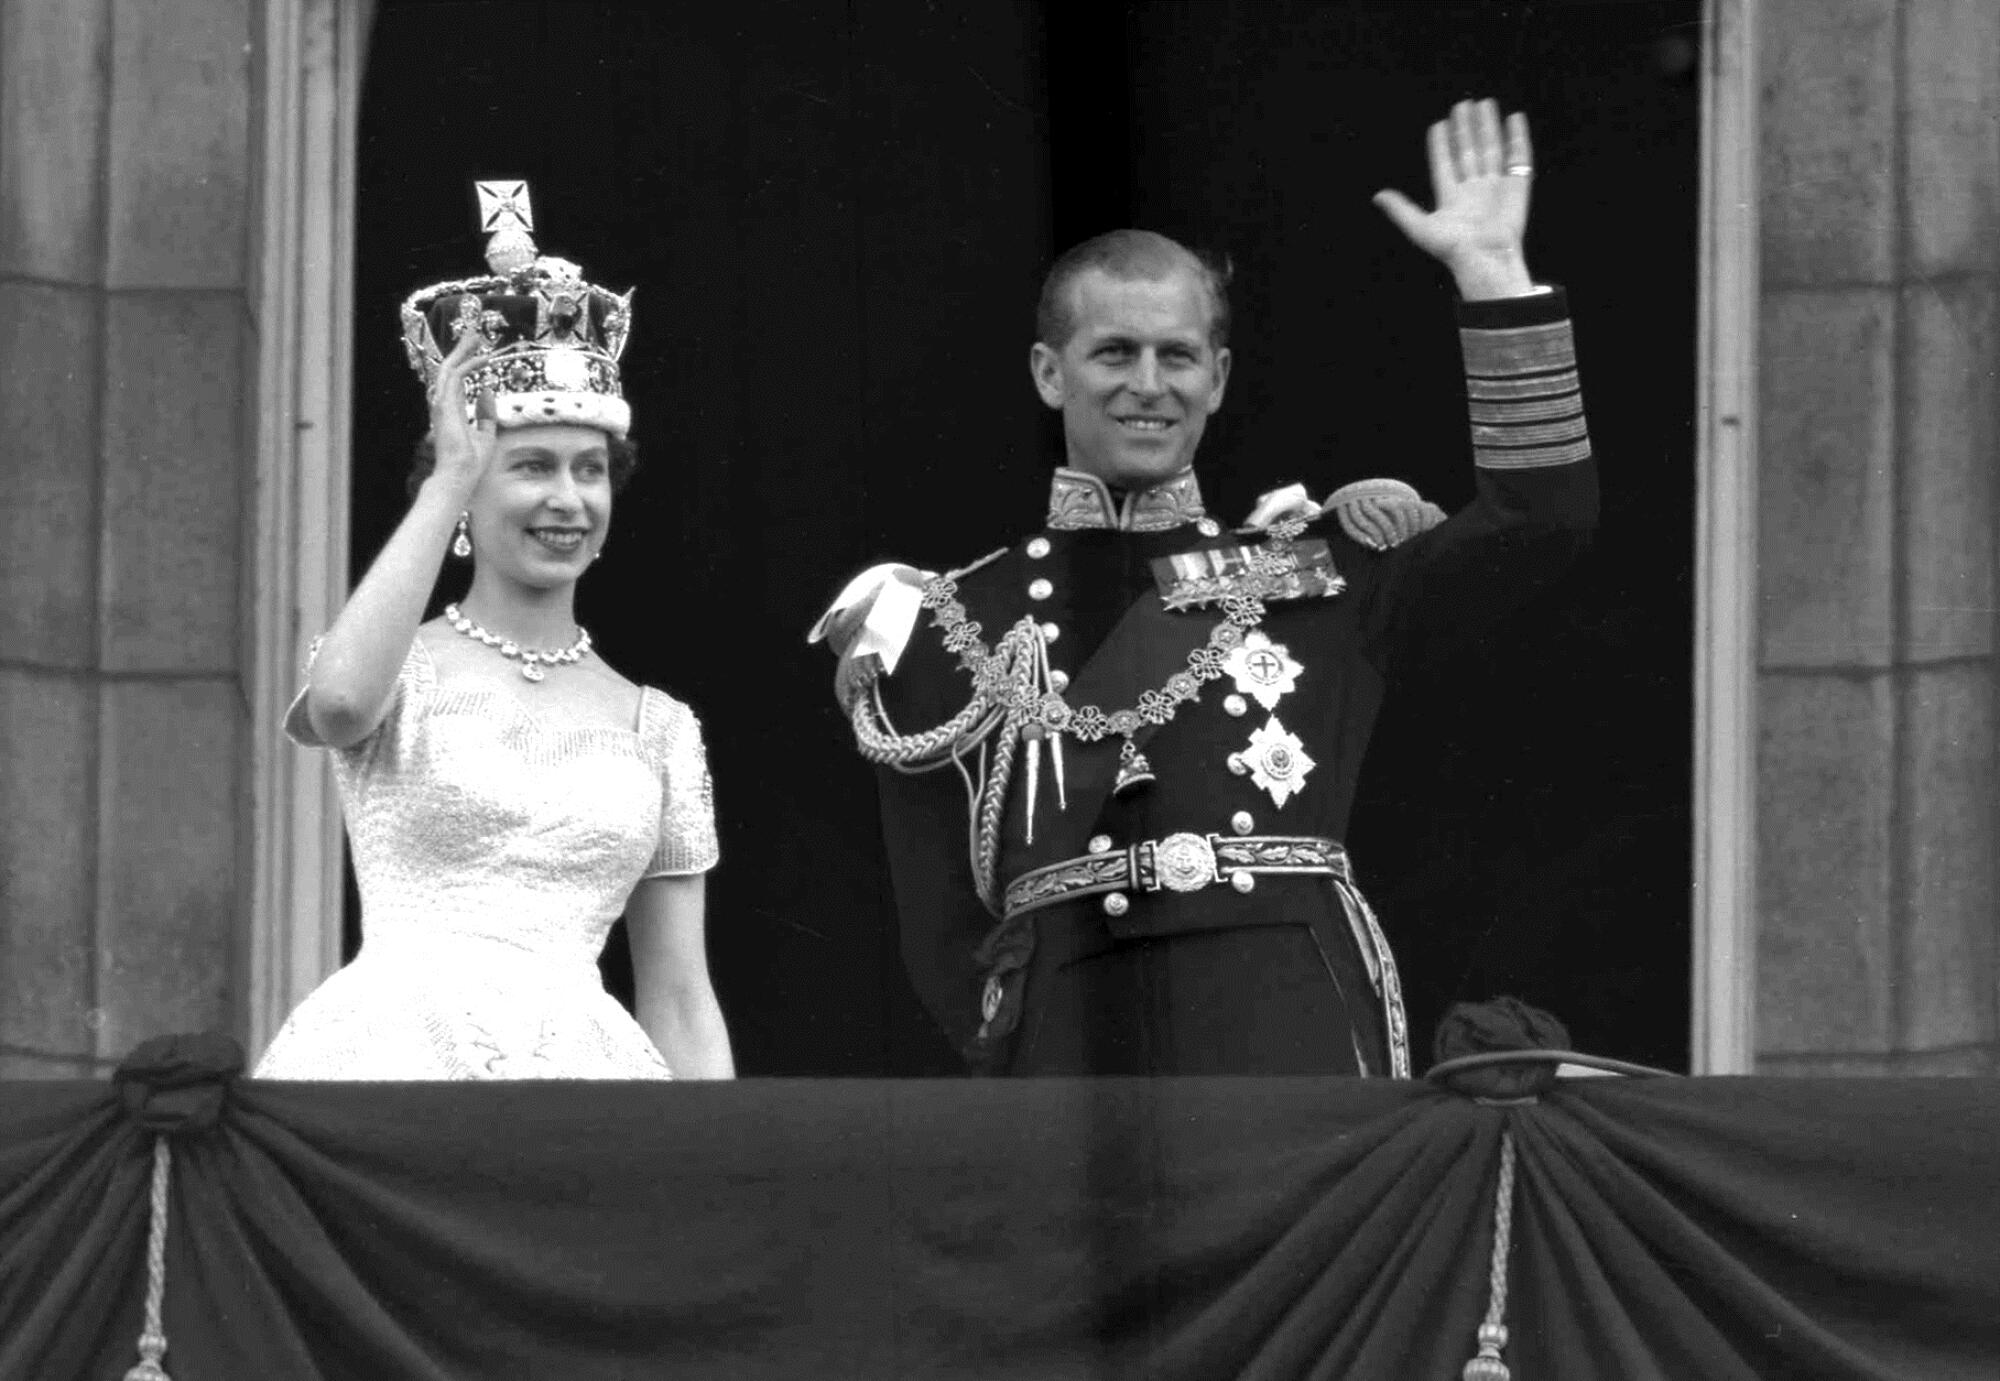 Newly crowned Queen Elizabeth II with Prince Philip